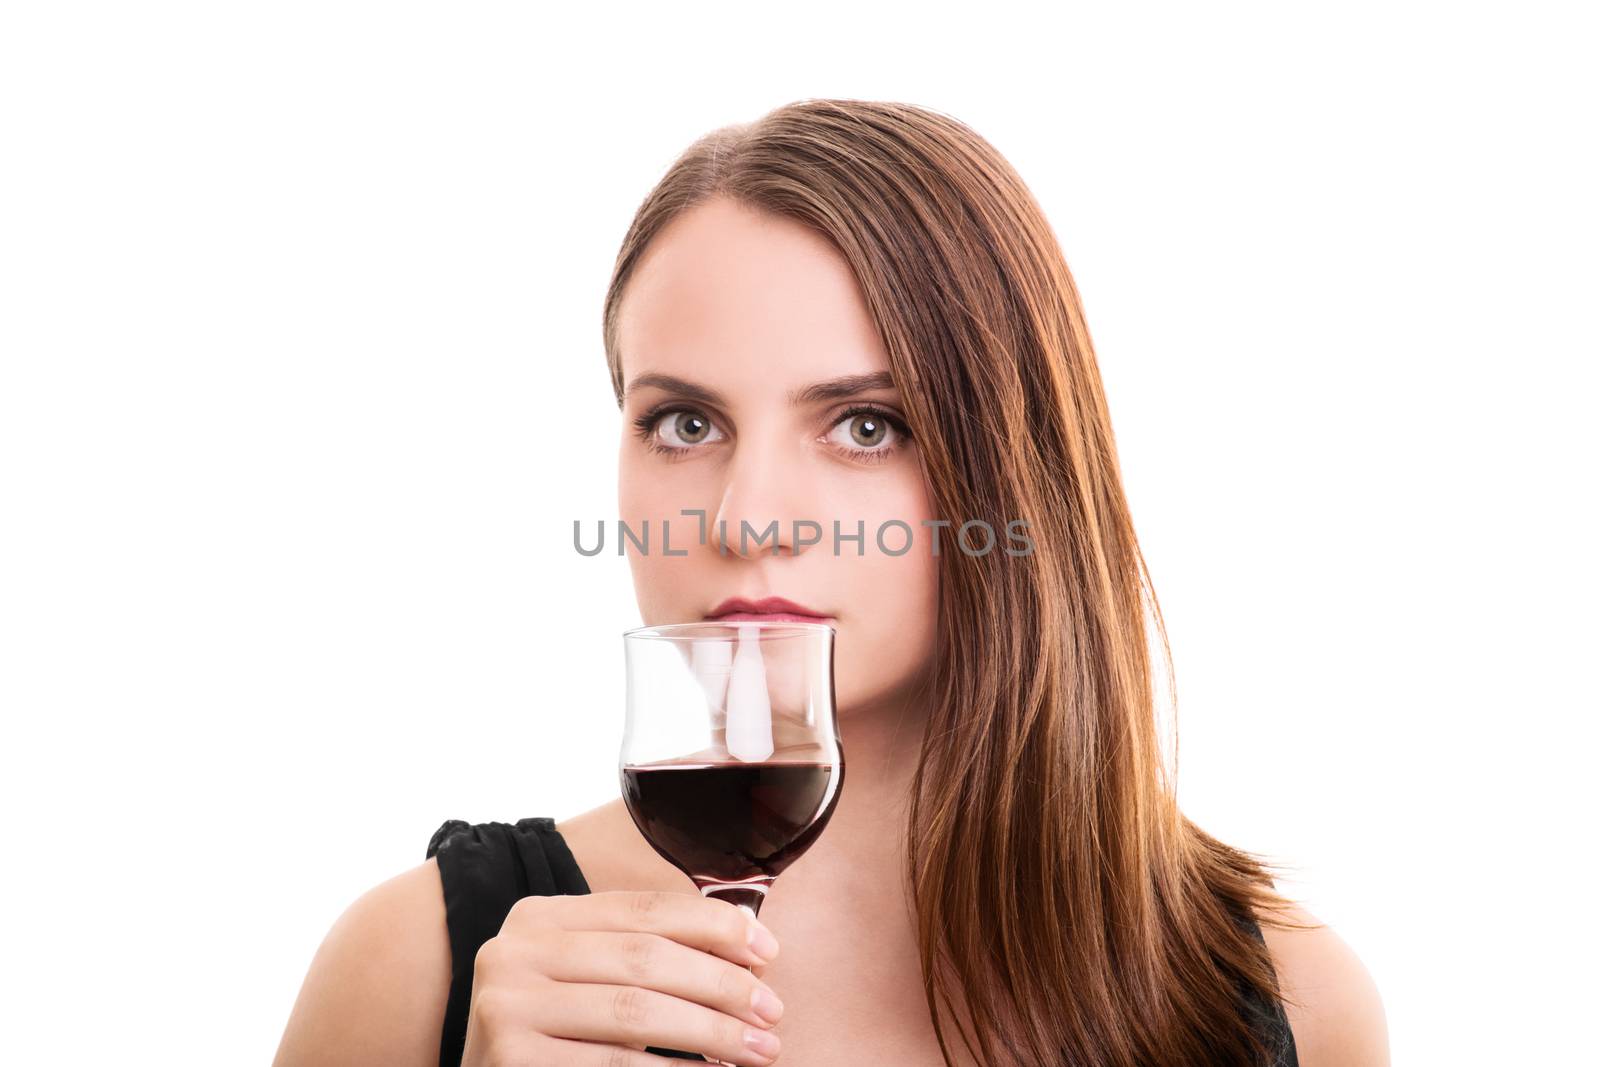 Beautiful young woman holding a glass of wine by Mendelex